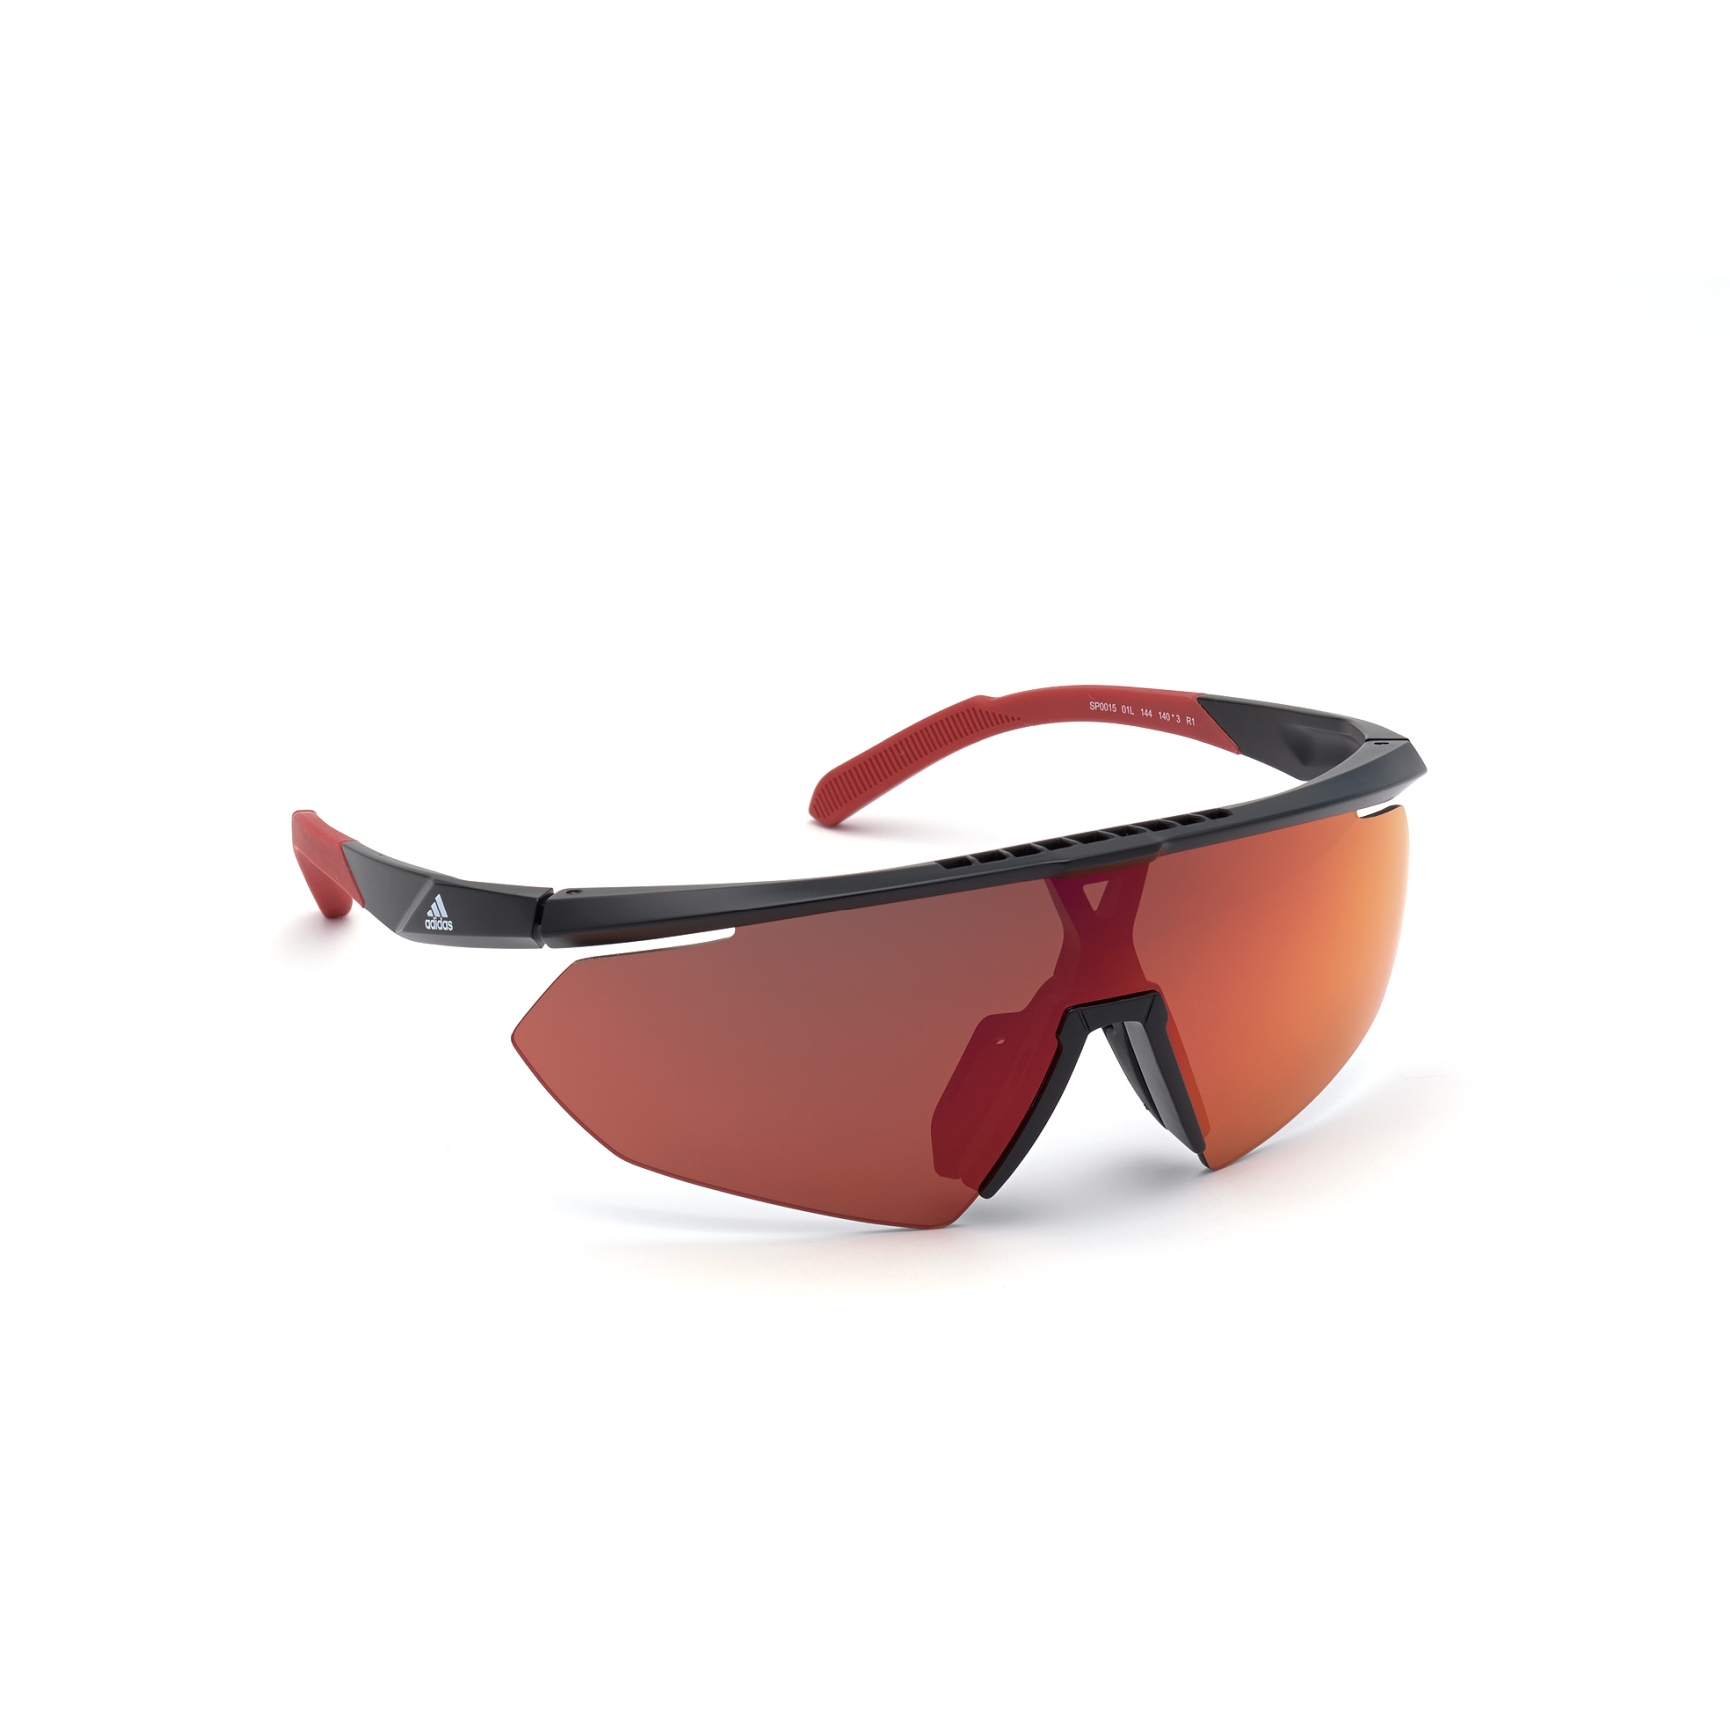 Picture of adidas Sp0015 Injected Sports Sunglasses - Shiny Black / Contrast Mirror Red + Orange